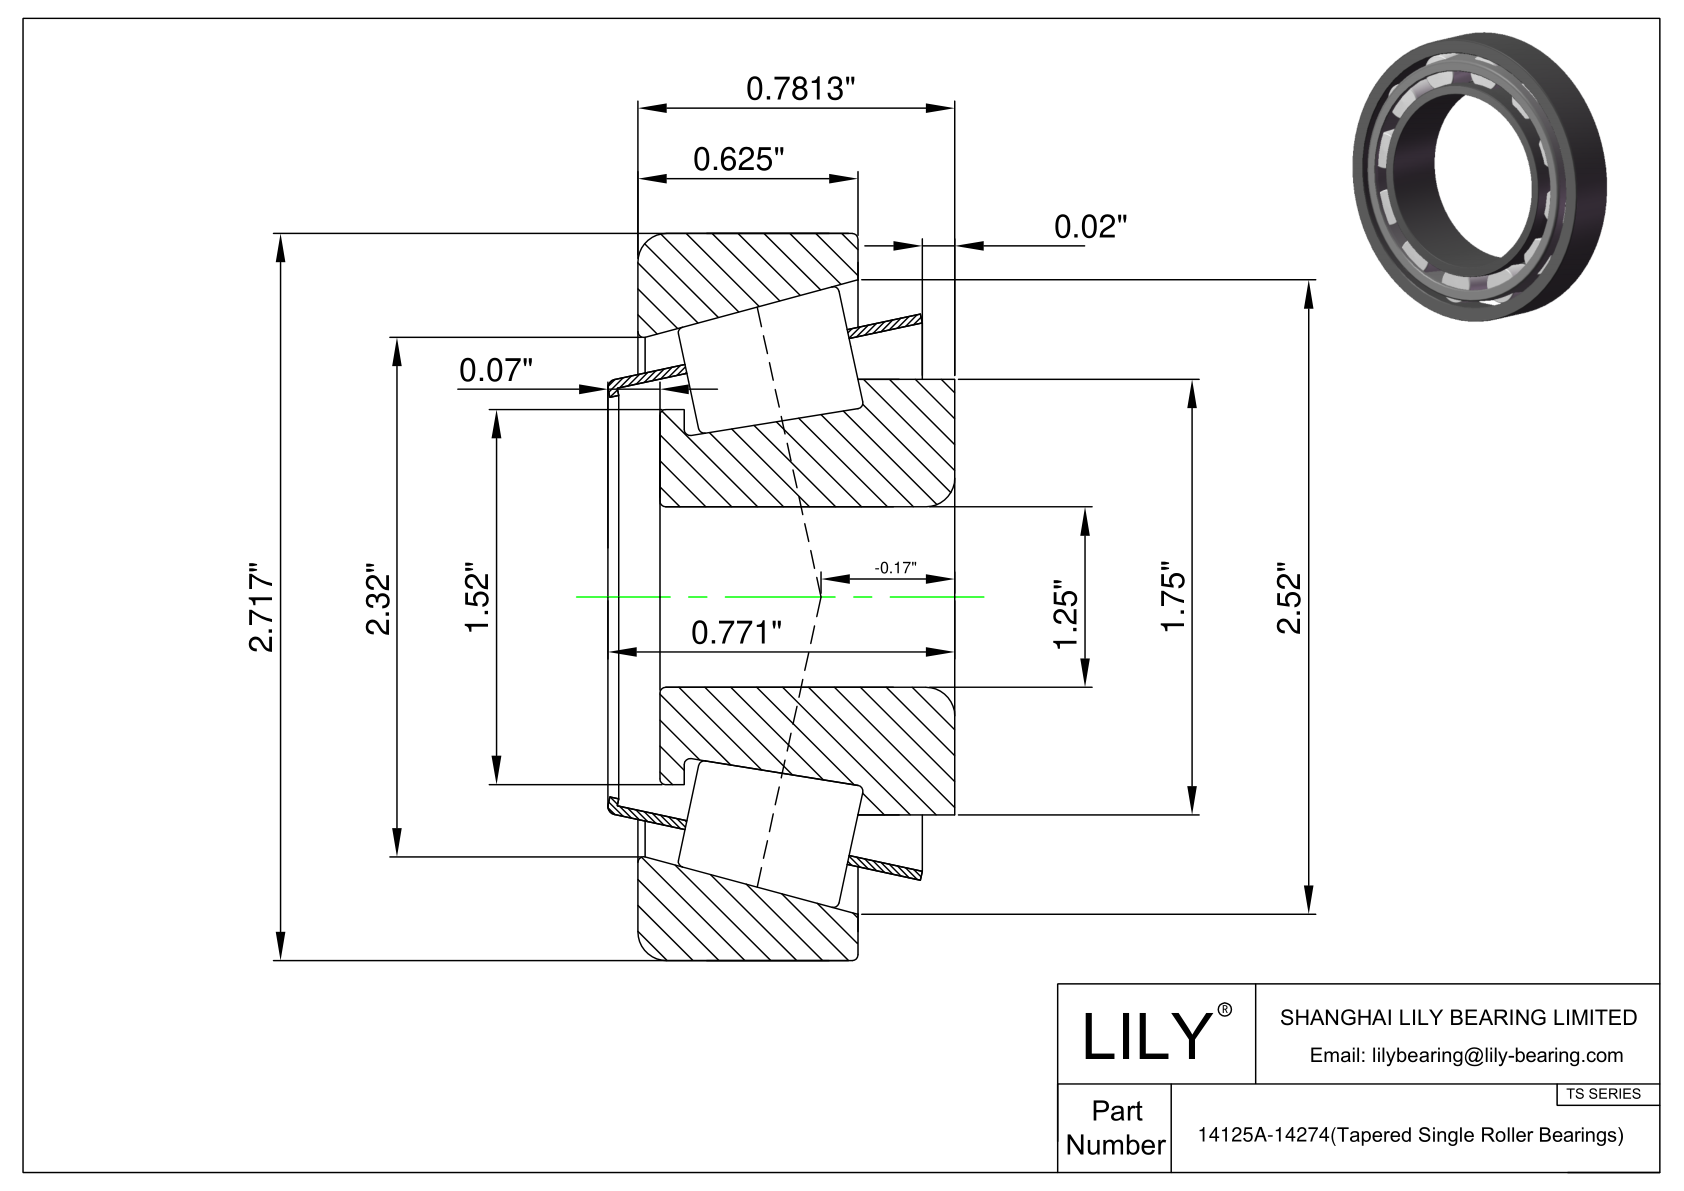 14125A-14274 TS (Tapered Single Roller Bearings) (Imperial) cad drawing